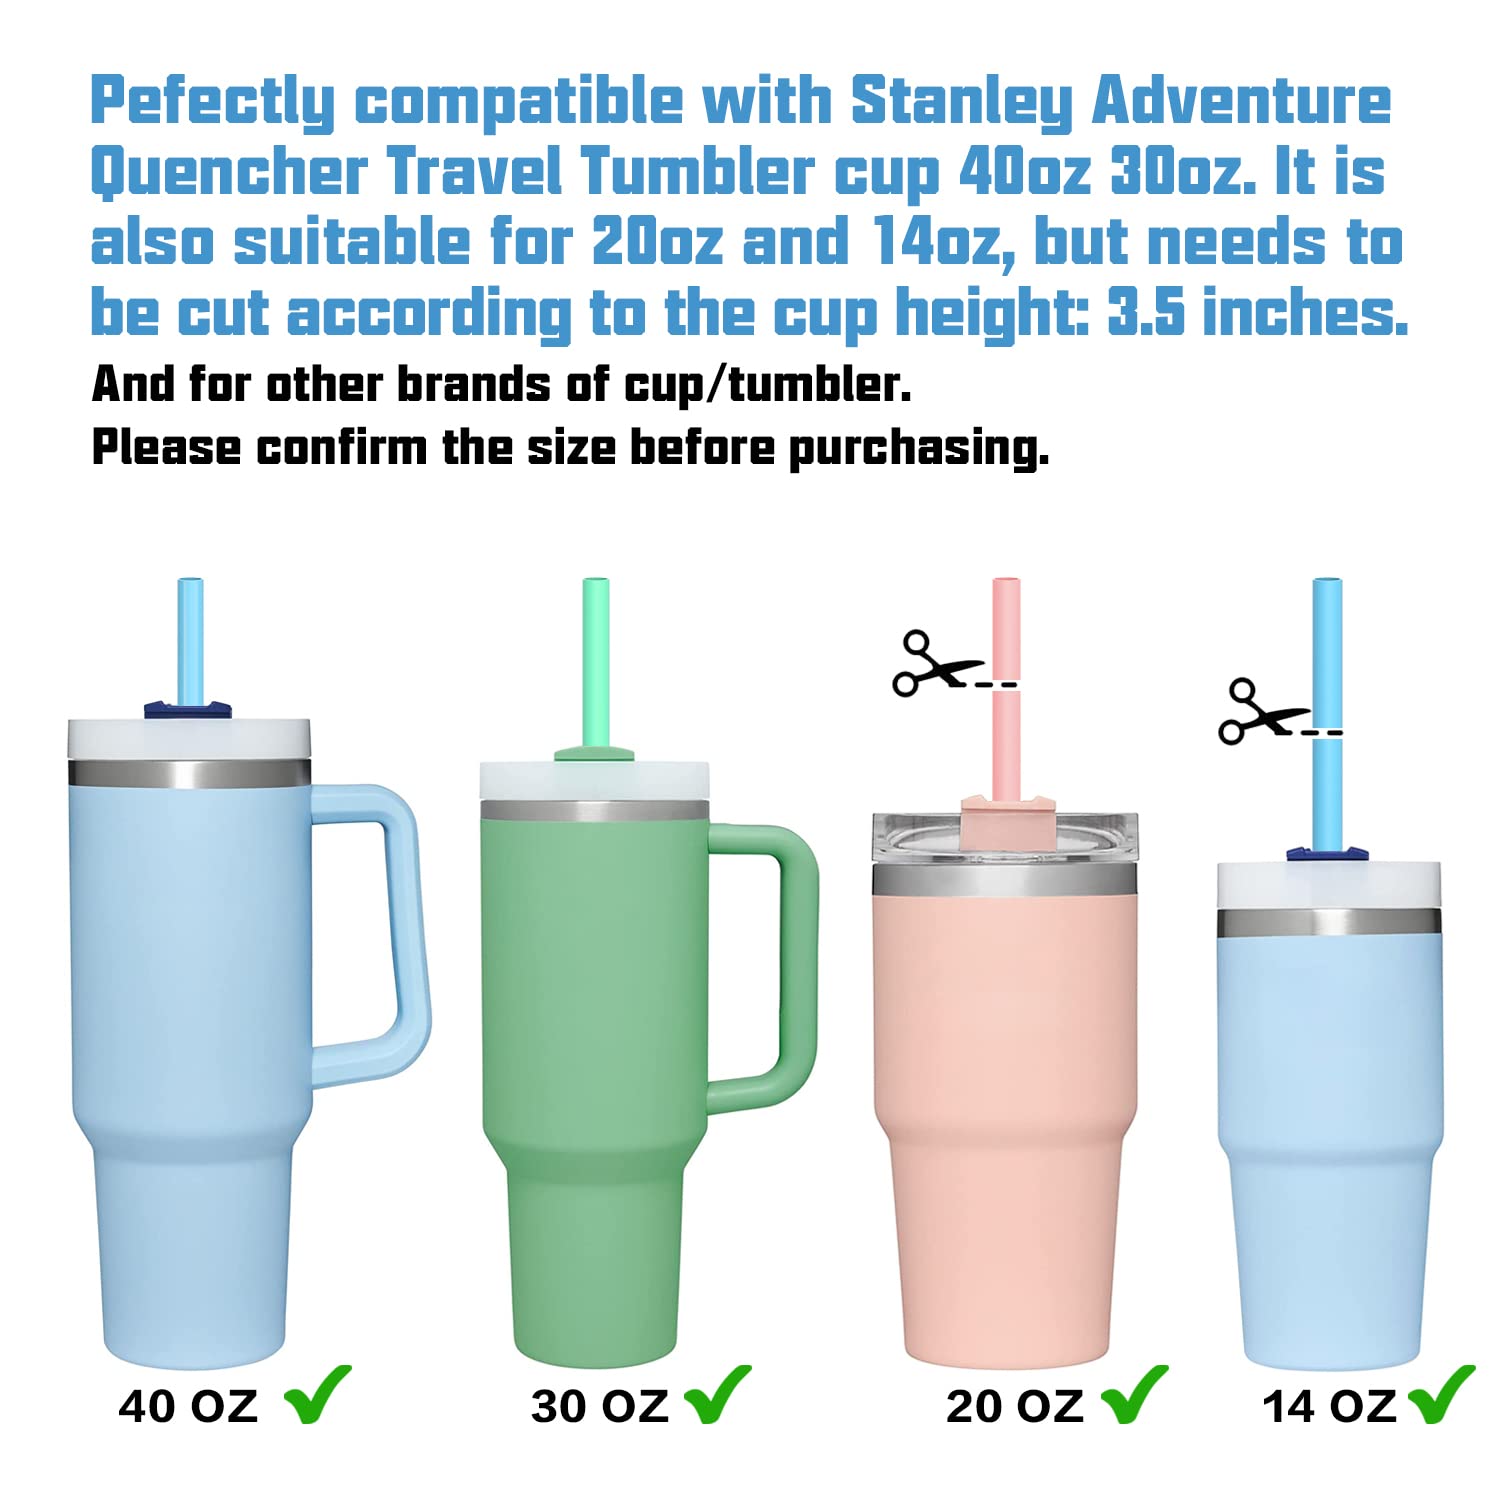 Silicone Straw Replacement for Stanley 40 oz 30 oz Tumbler Cup, 6 Pack Reusable Straws with Cleaning Brush for Stanley Adventure Quencher Travel Tumbler, Straw for Stanley Accessories